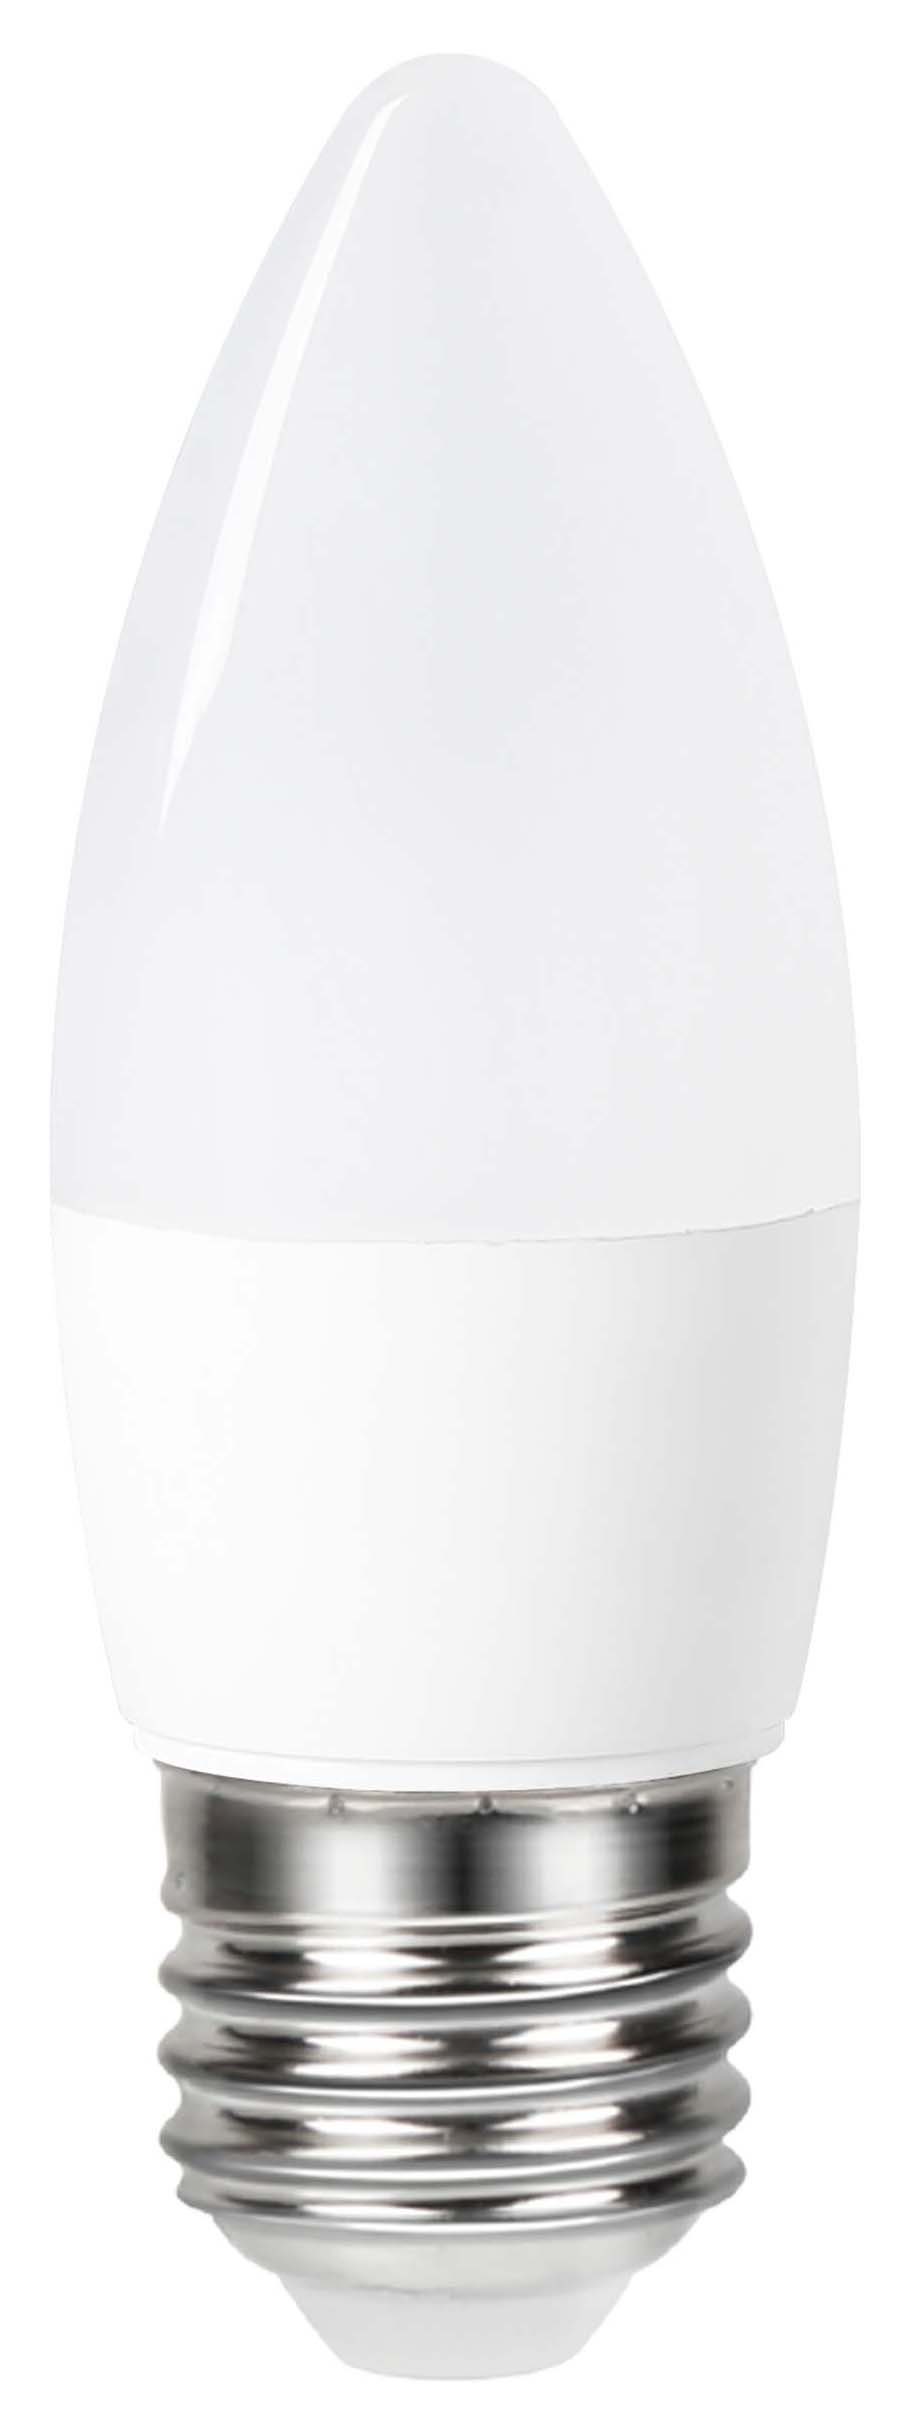 Image of Wickes Dimmable Opal LED E27 Candle 4.9W Warm White Light Bulb